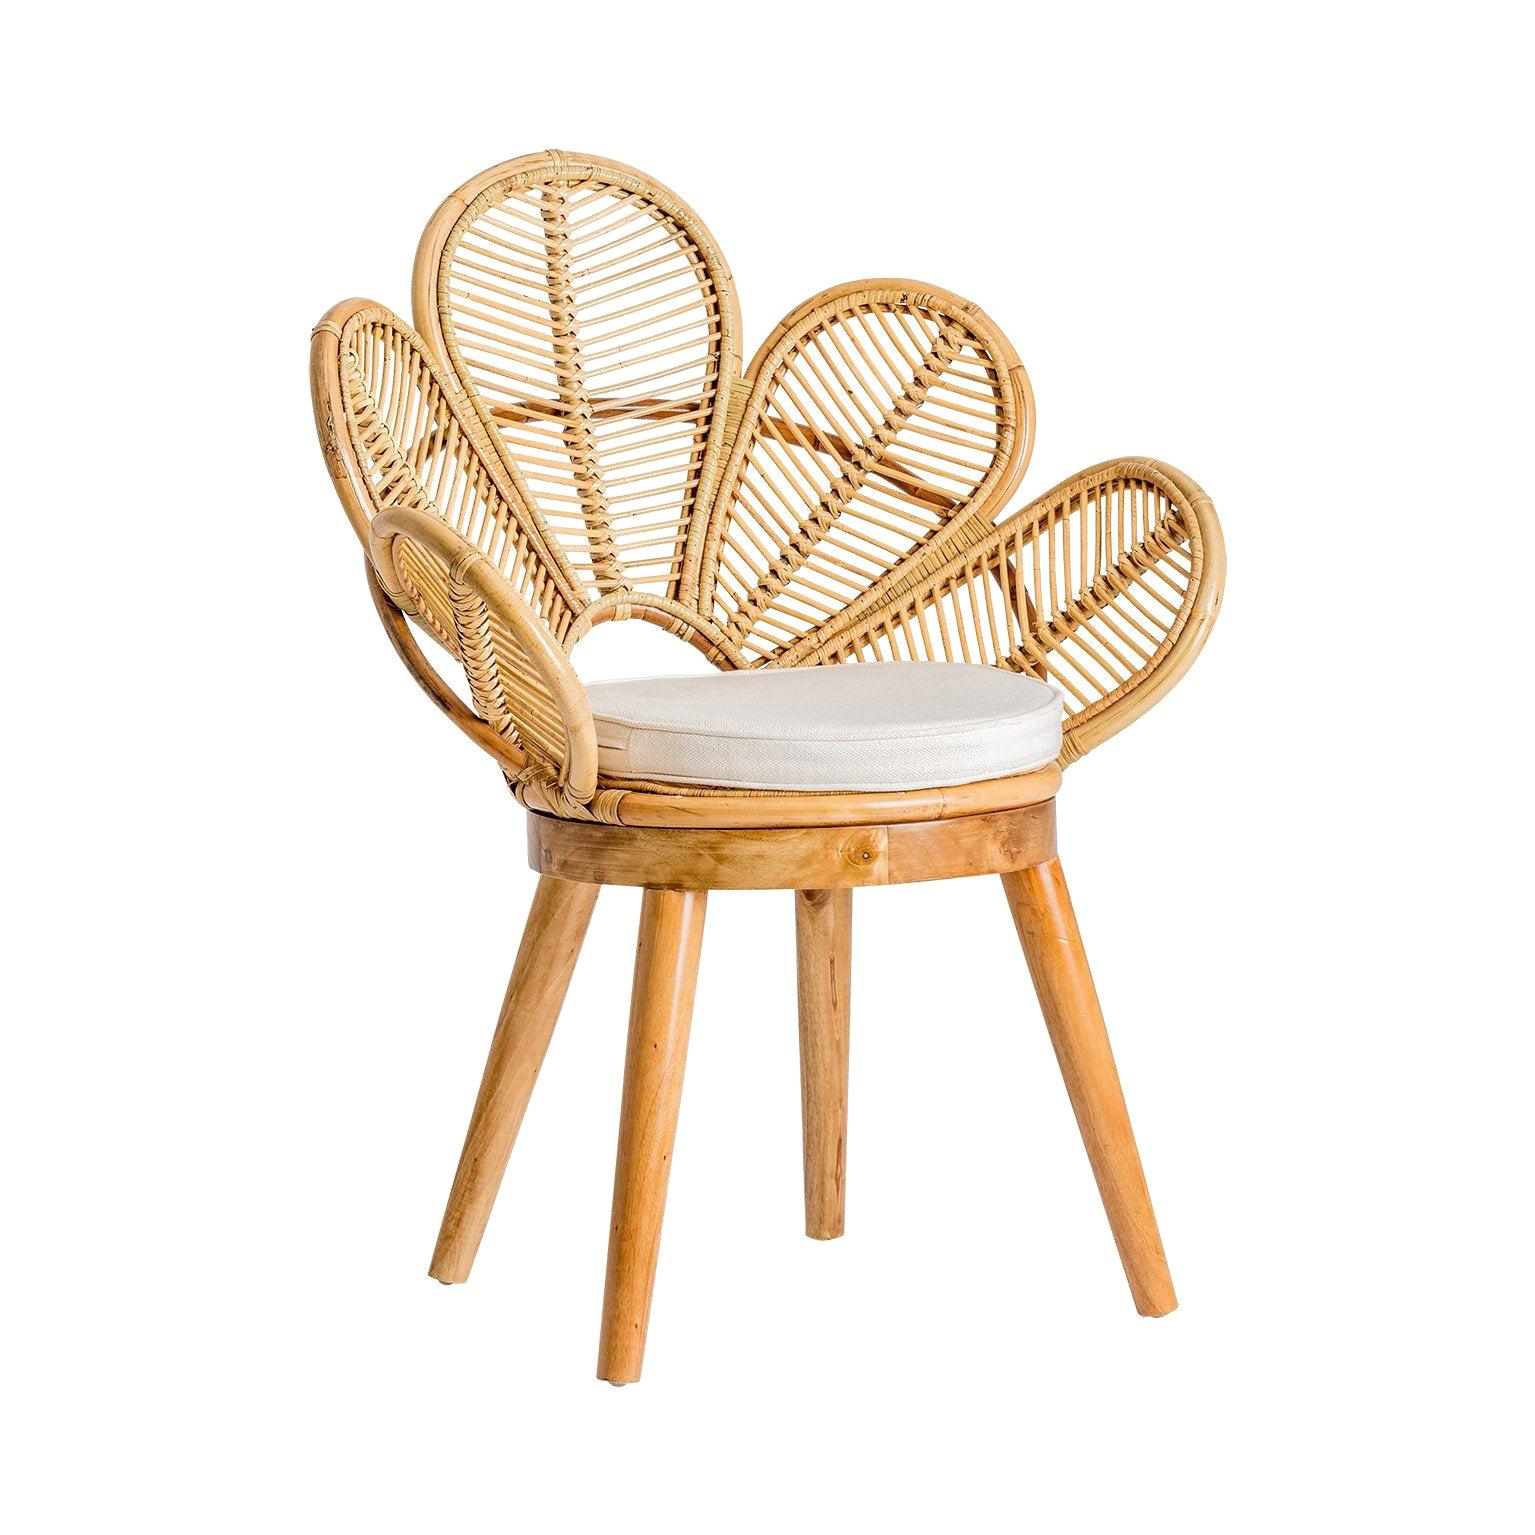 Wooden and Rattan Flower Shaped Chair